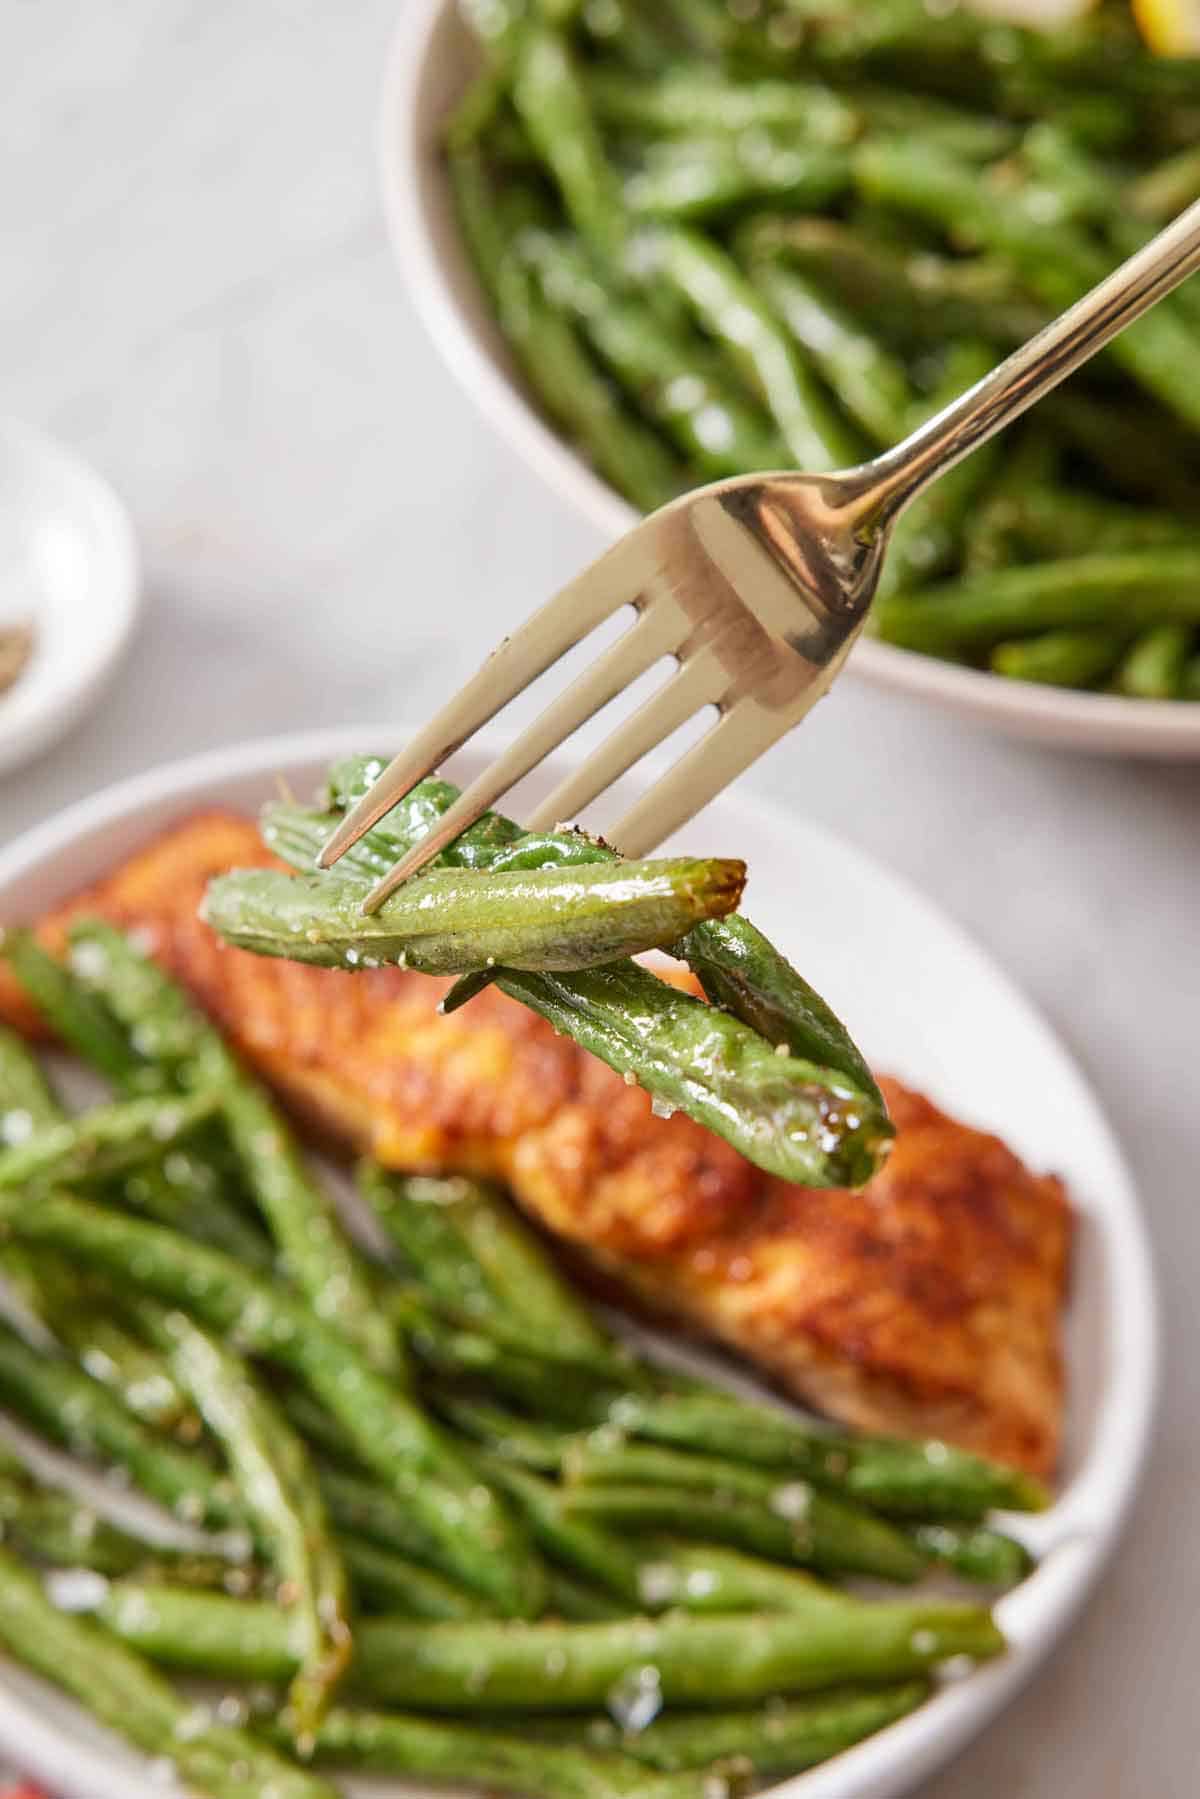 A fork lifting up a three pieces of air fryer green beans from a plate with green beans and salmon.